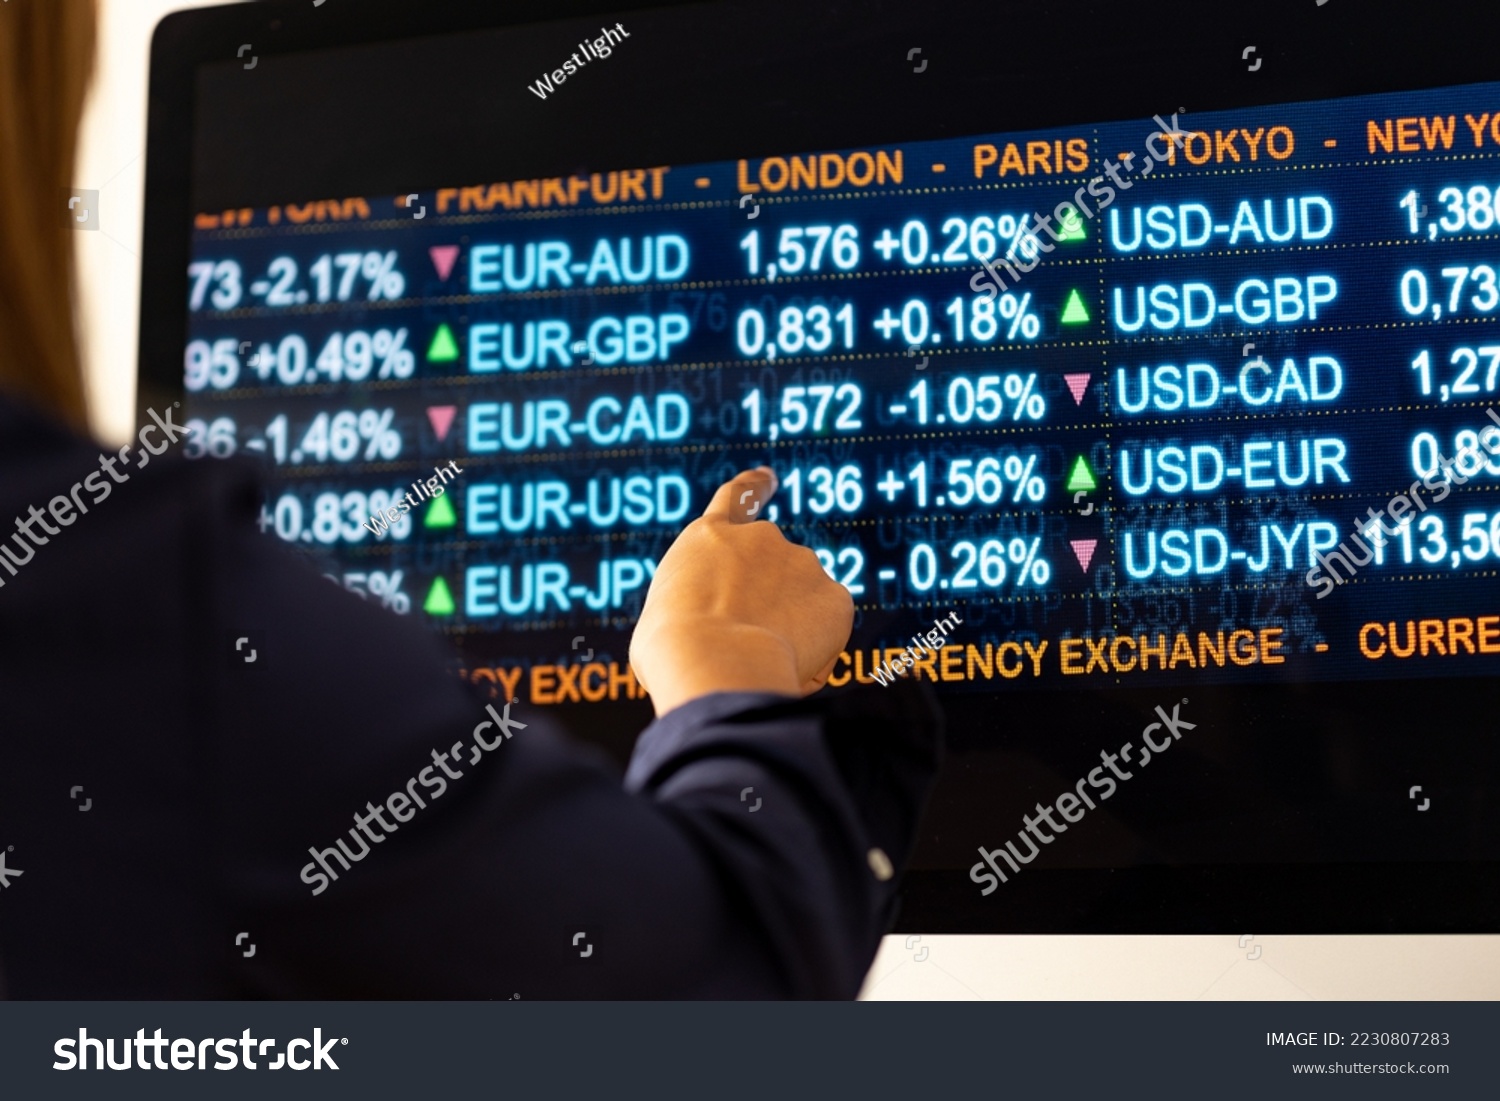 Computer monitor with currency exchange rates. Woman points her finger at the monitor. Currencies like usd, EUR, GBP, JPY and CHF on the screen. Banking, busines, trading, exchange and investment. #2230807283